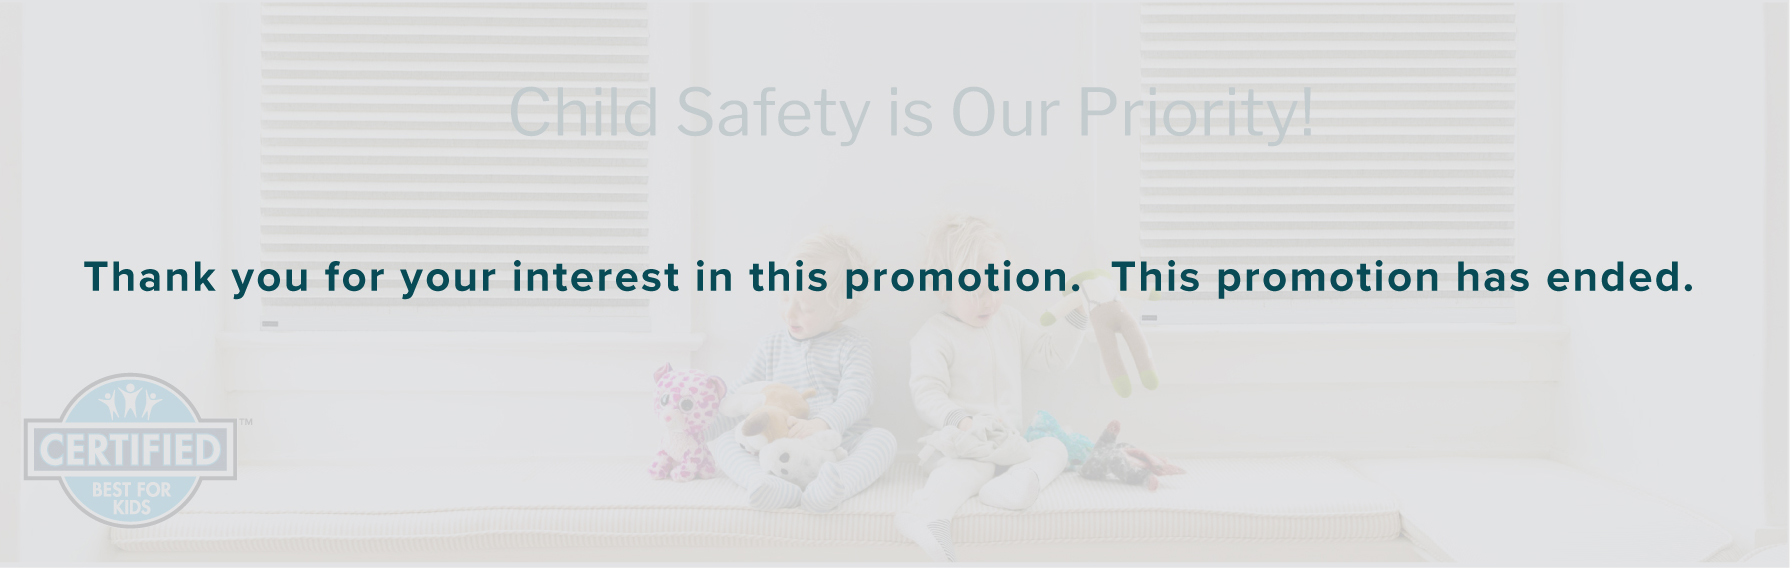 Norman® Child Safety